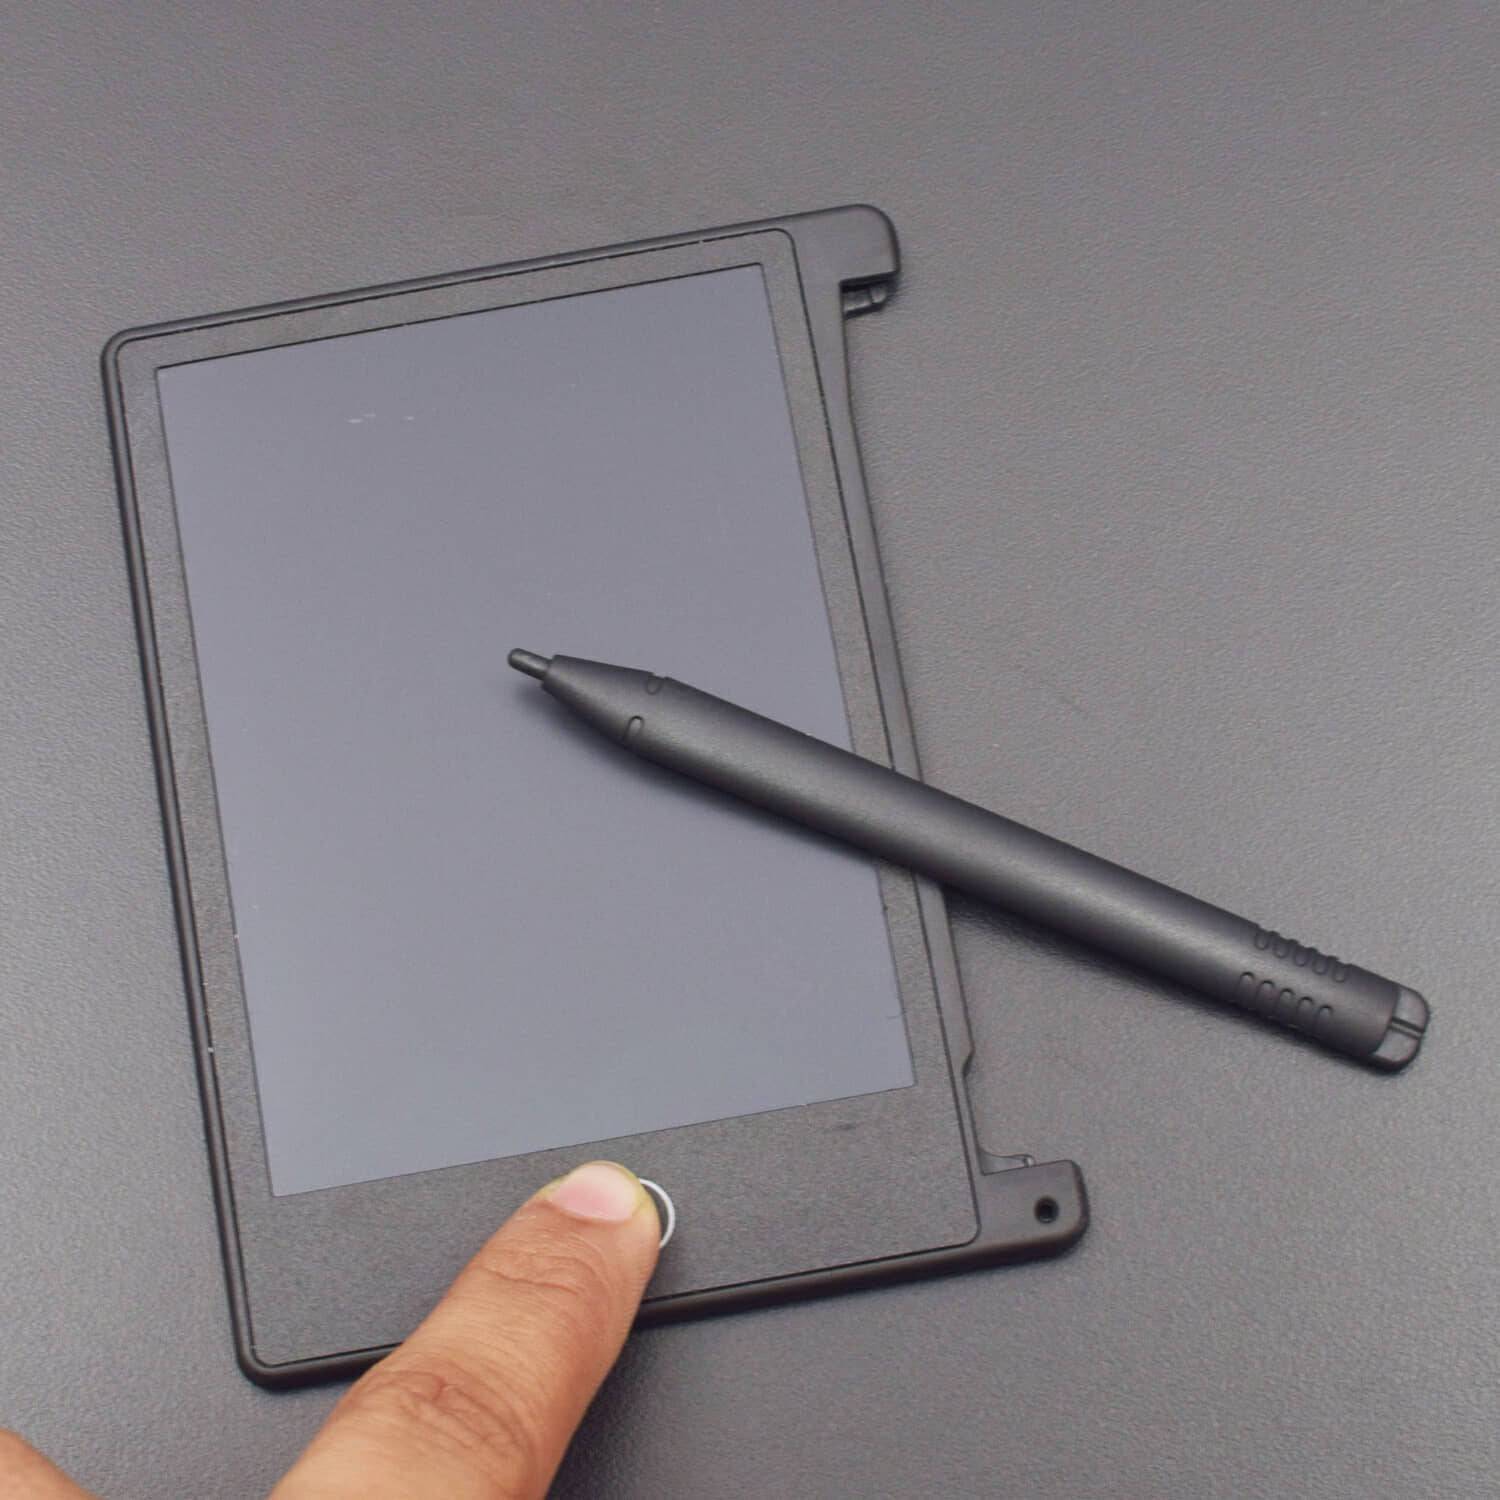 4.4 inch Mini Writing Tablet Digital LCD Drawing Notepad Electronic Practice Handwriting Painting Tablet - RS1748 - REES52